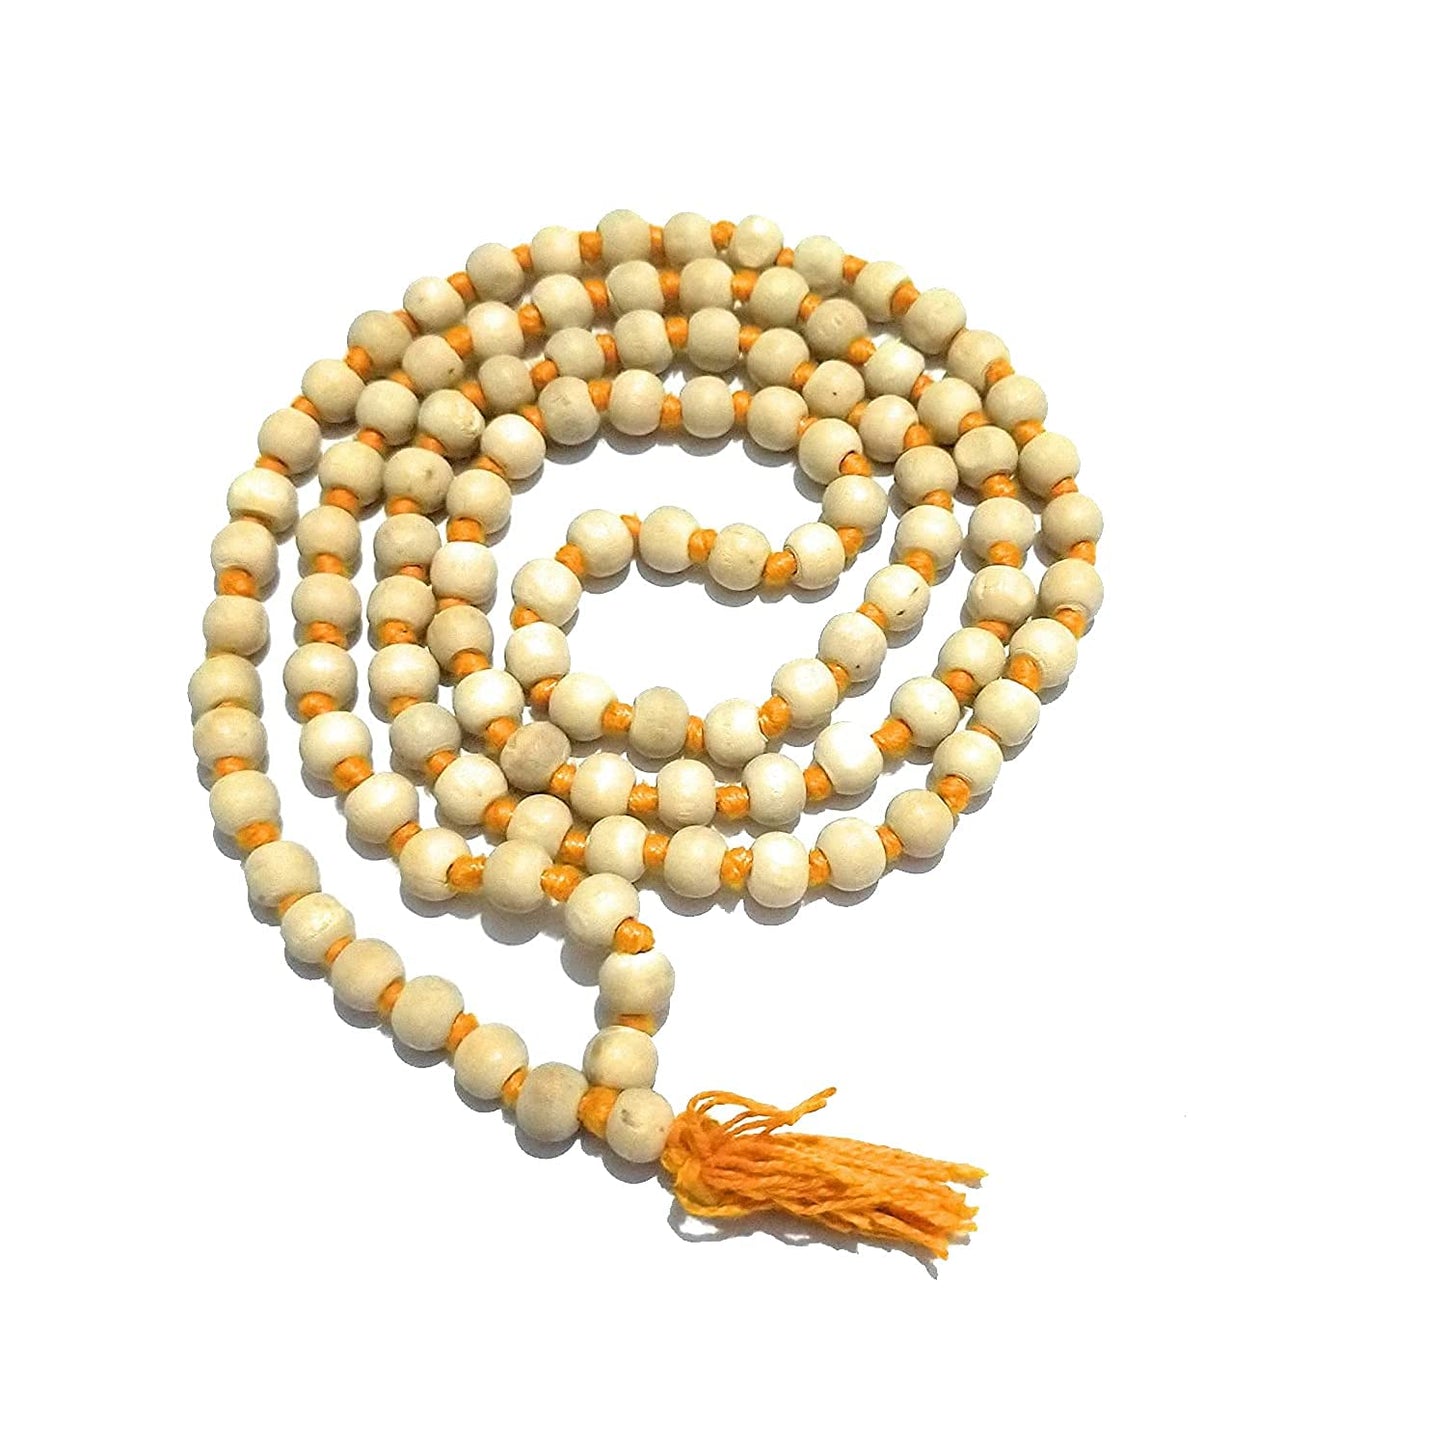 Pujahome Tulsi Japa Mala 108+1(8mm) Beads Pure Tulsi Jap Mala for Mantra Jaap with Goumukhi Jaap Bag (Combo Pack 2)